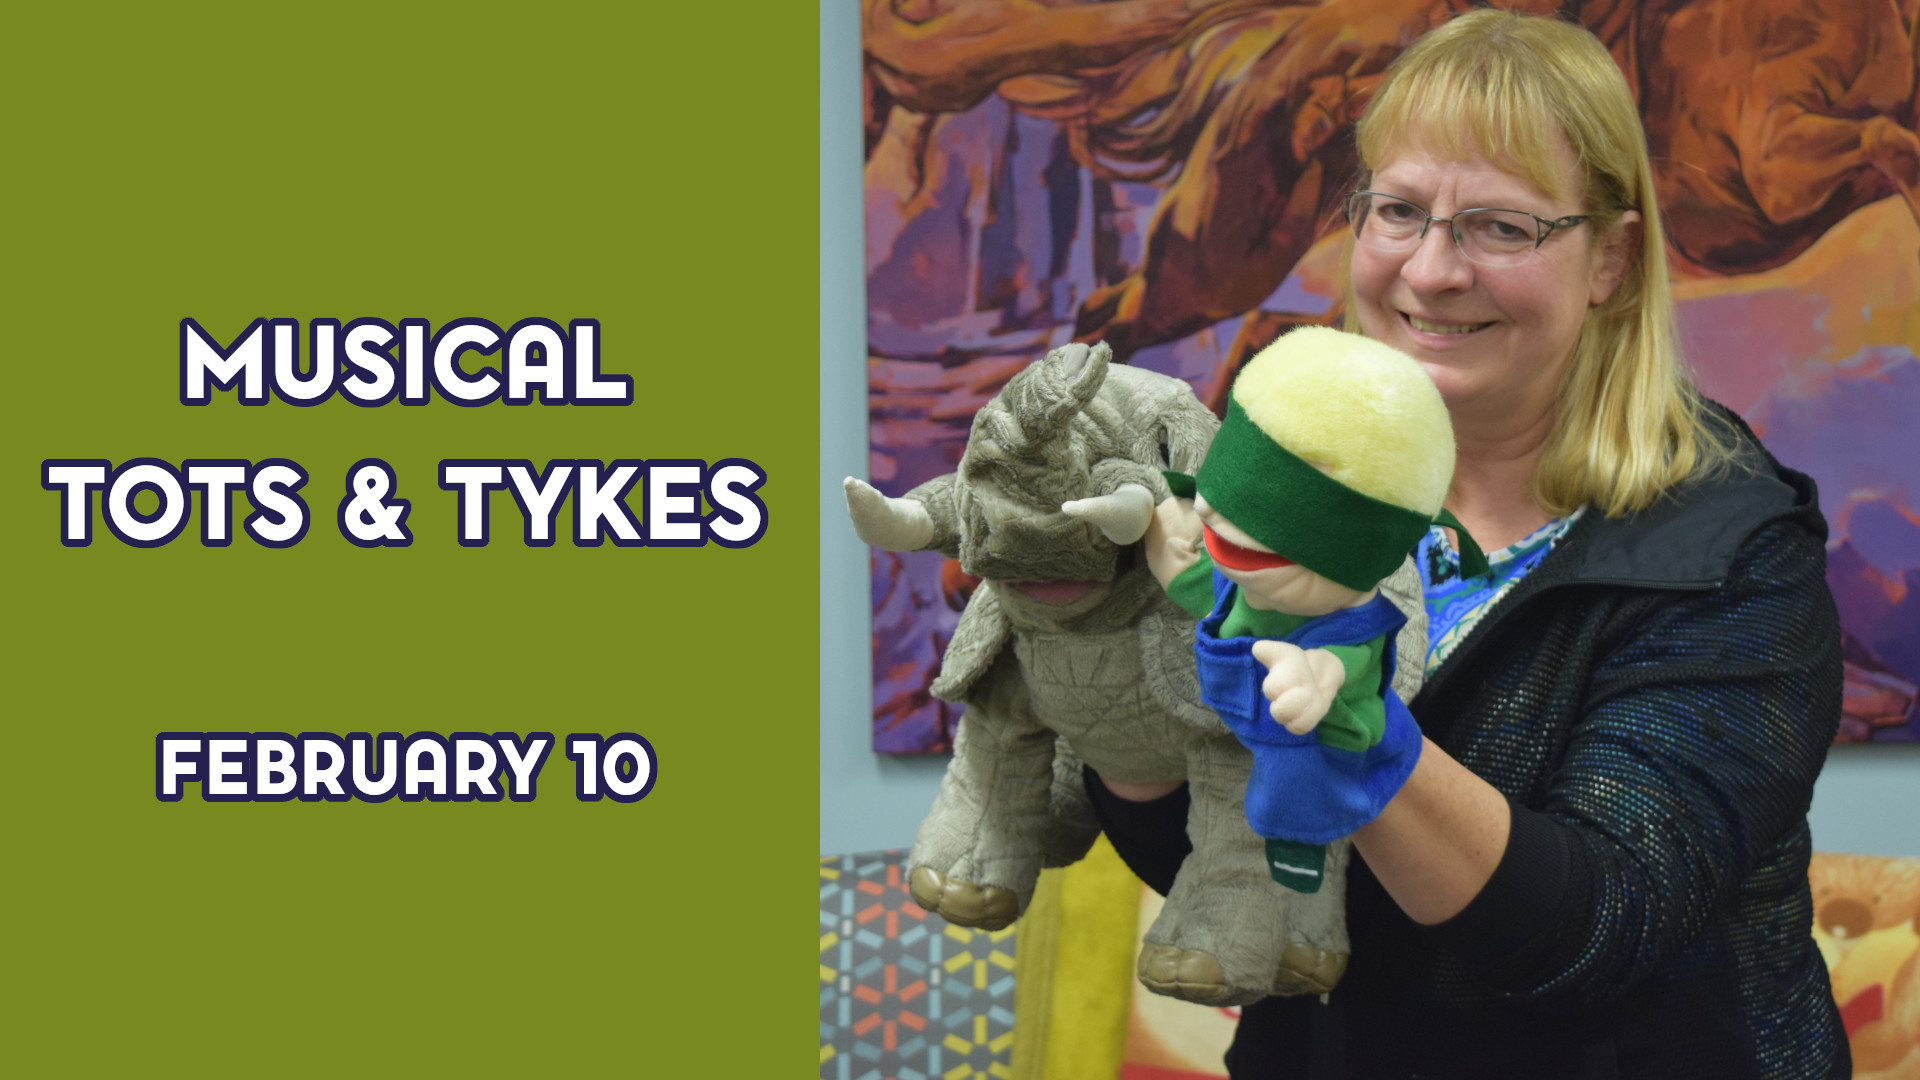 A woman holds puppets next to the text "Musical Tots & Tykes February 10"